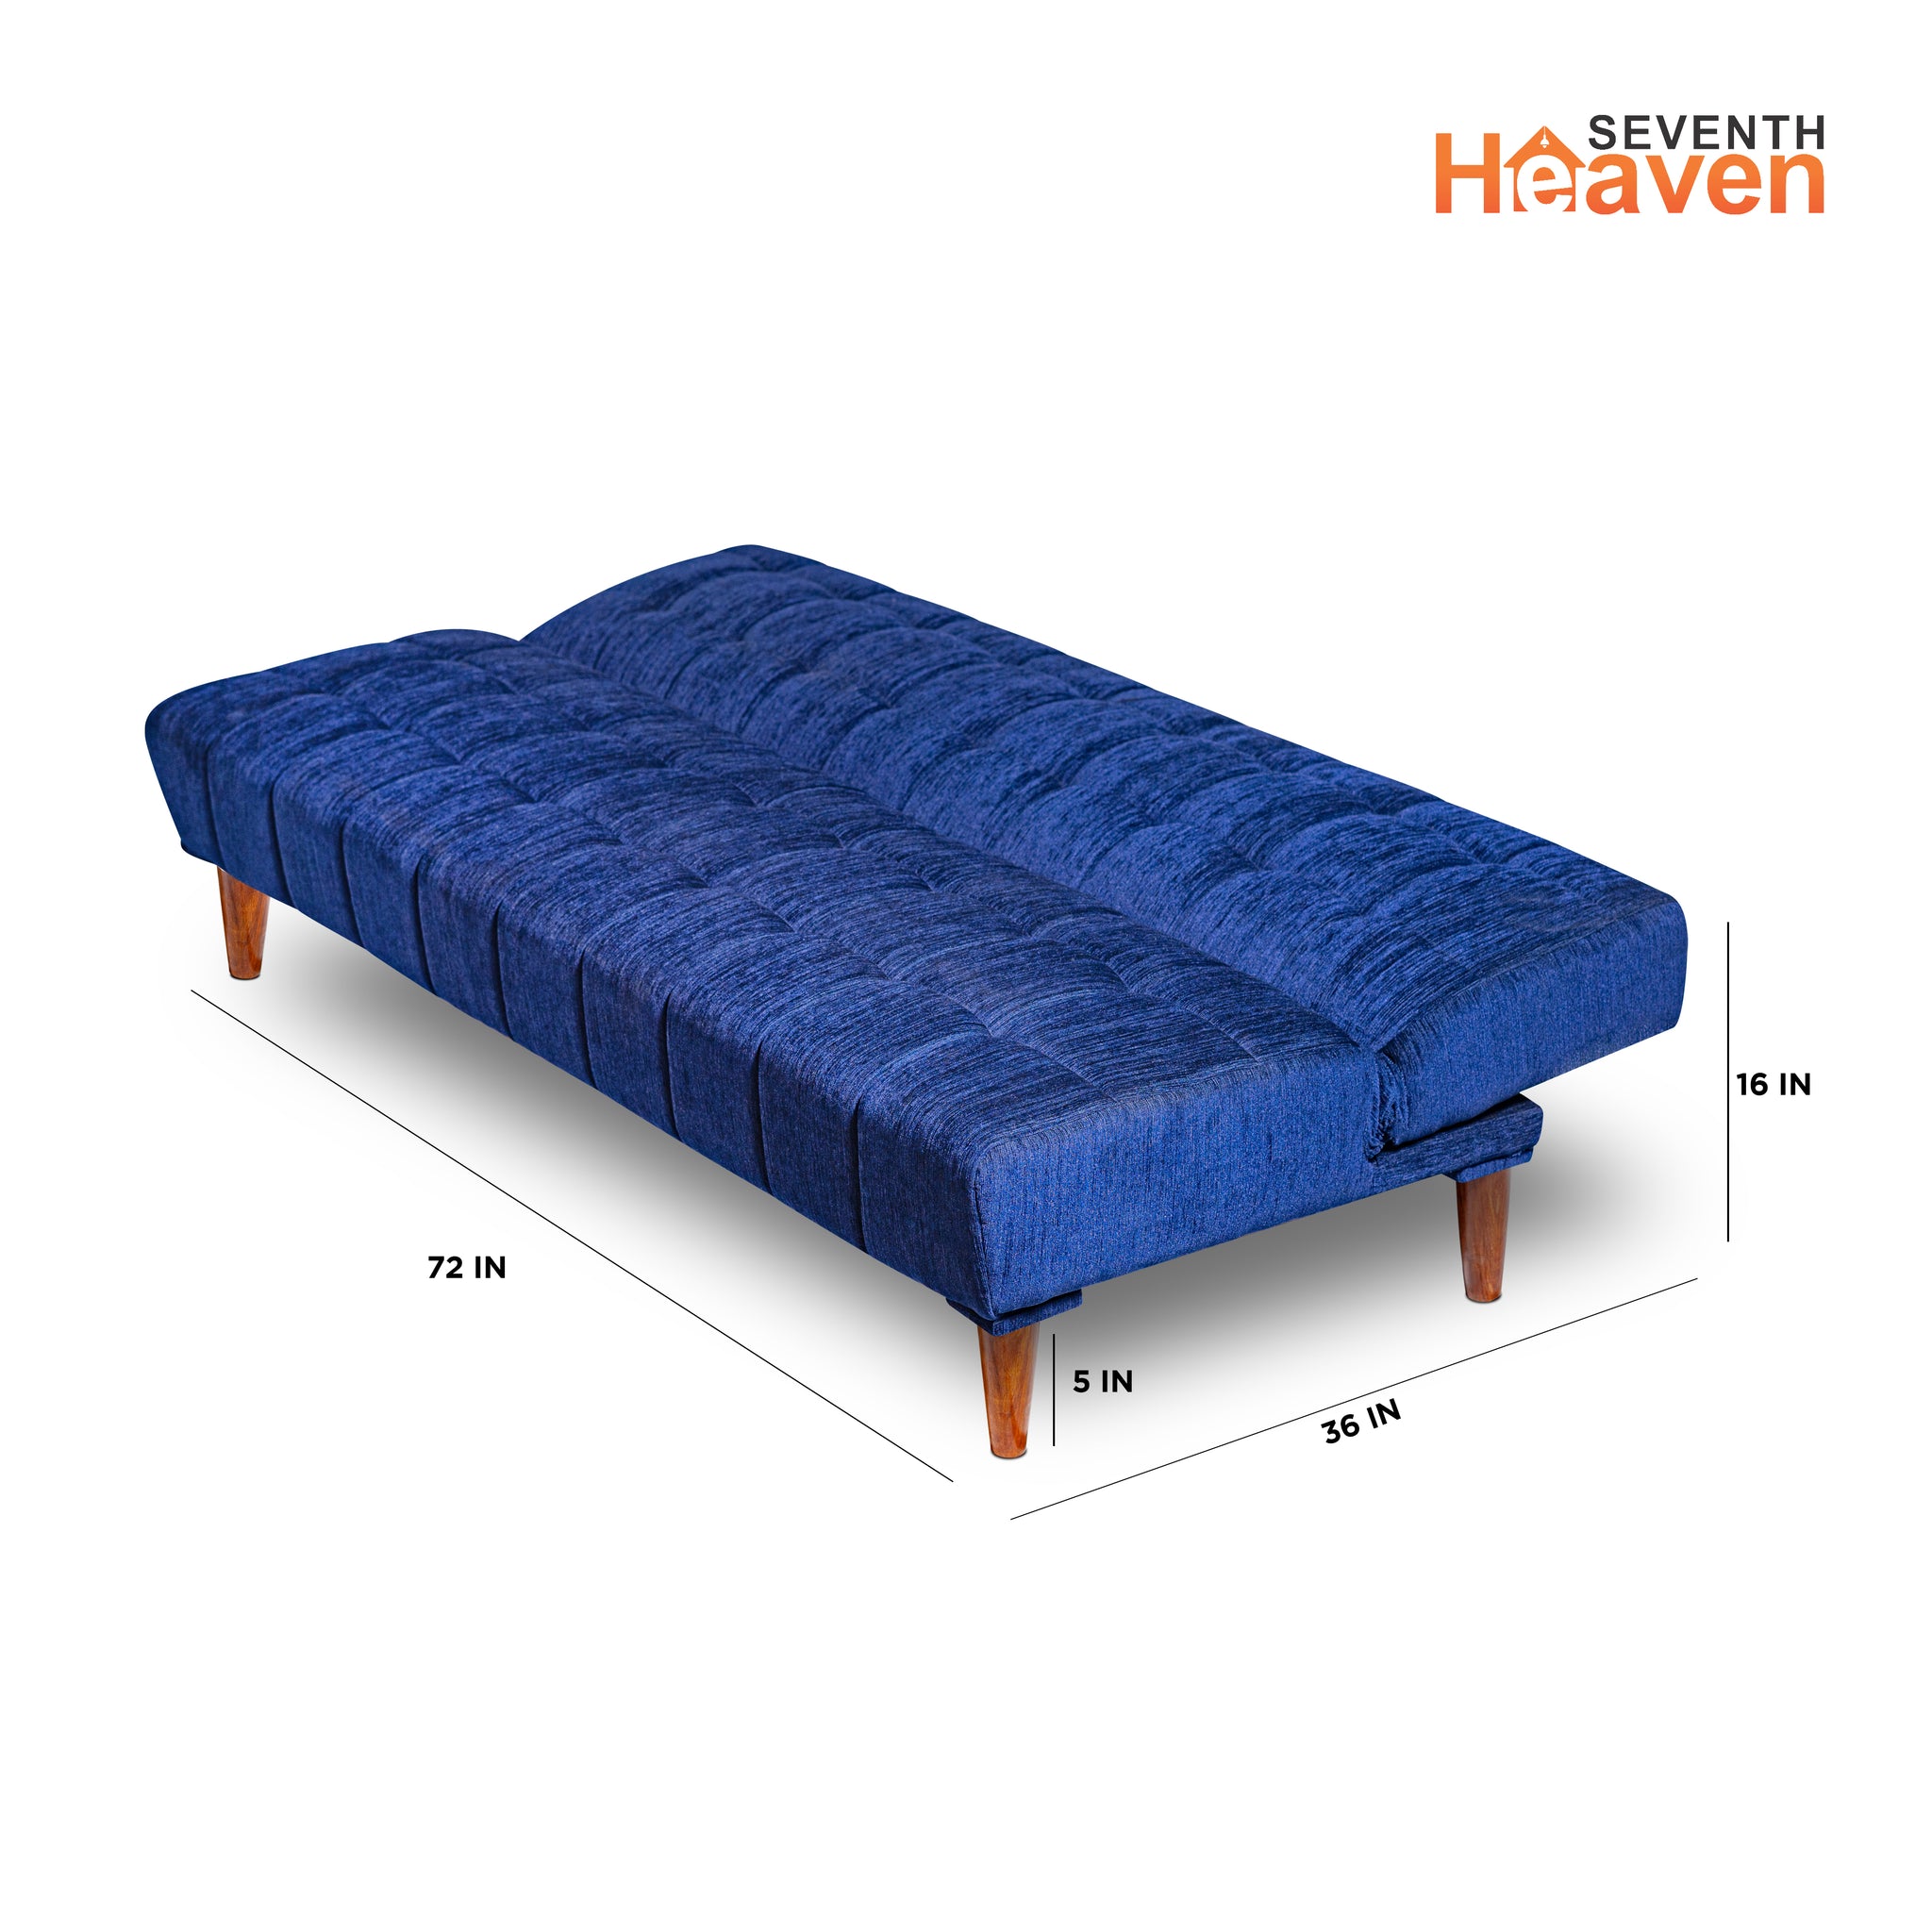 Seventh Heaven Florida Neo 4 Seater Wooden Sofa Cum Bed Modern & Elegant Smart Furniture Range for luxurious homes, living rooms and offices. Use as a sofa, lounger or bed. Perfect for guests. Molphino fabric with sheesham polished wooden legs. Blue colour.